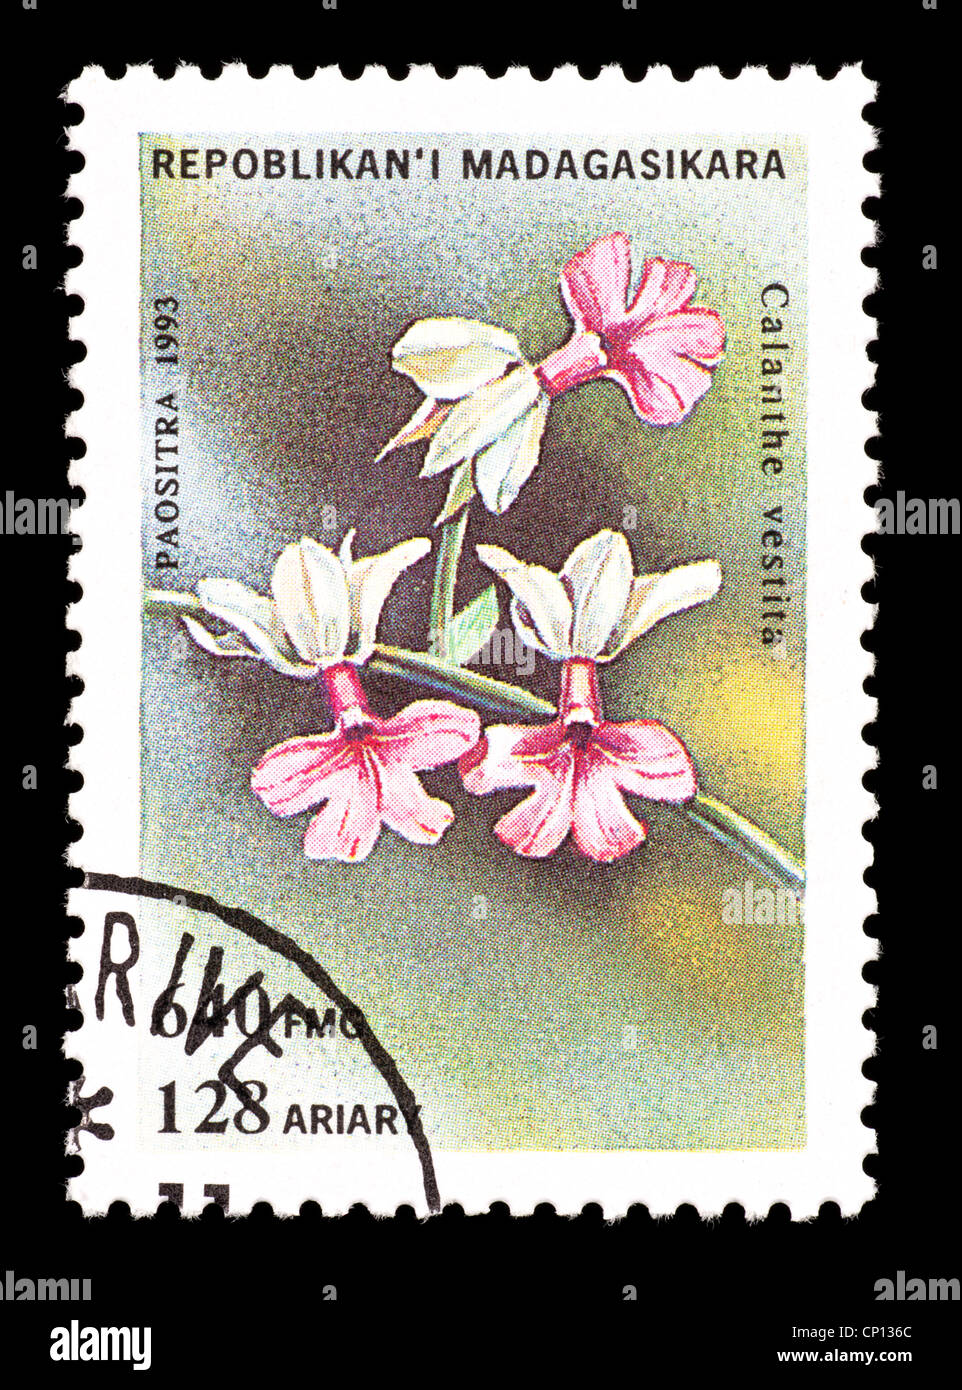 Postage stamp from Madagascar depicting a tropical orchid (Calanthe vestita) Stock Photo